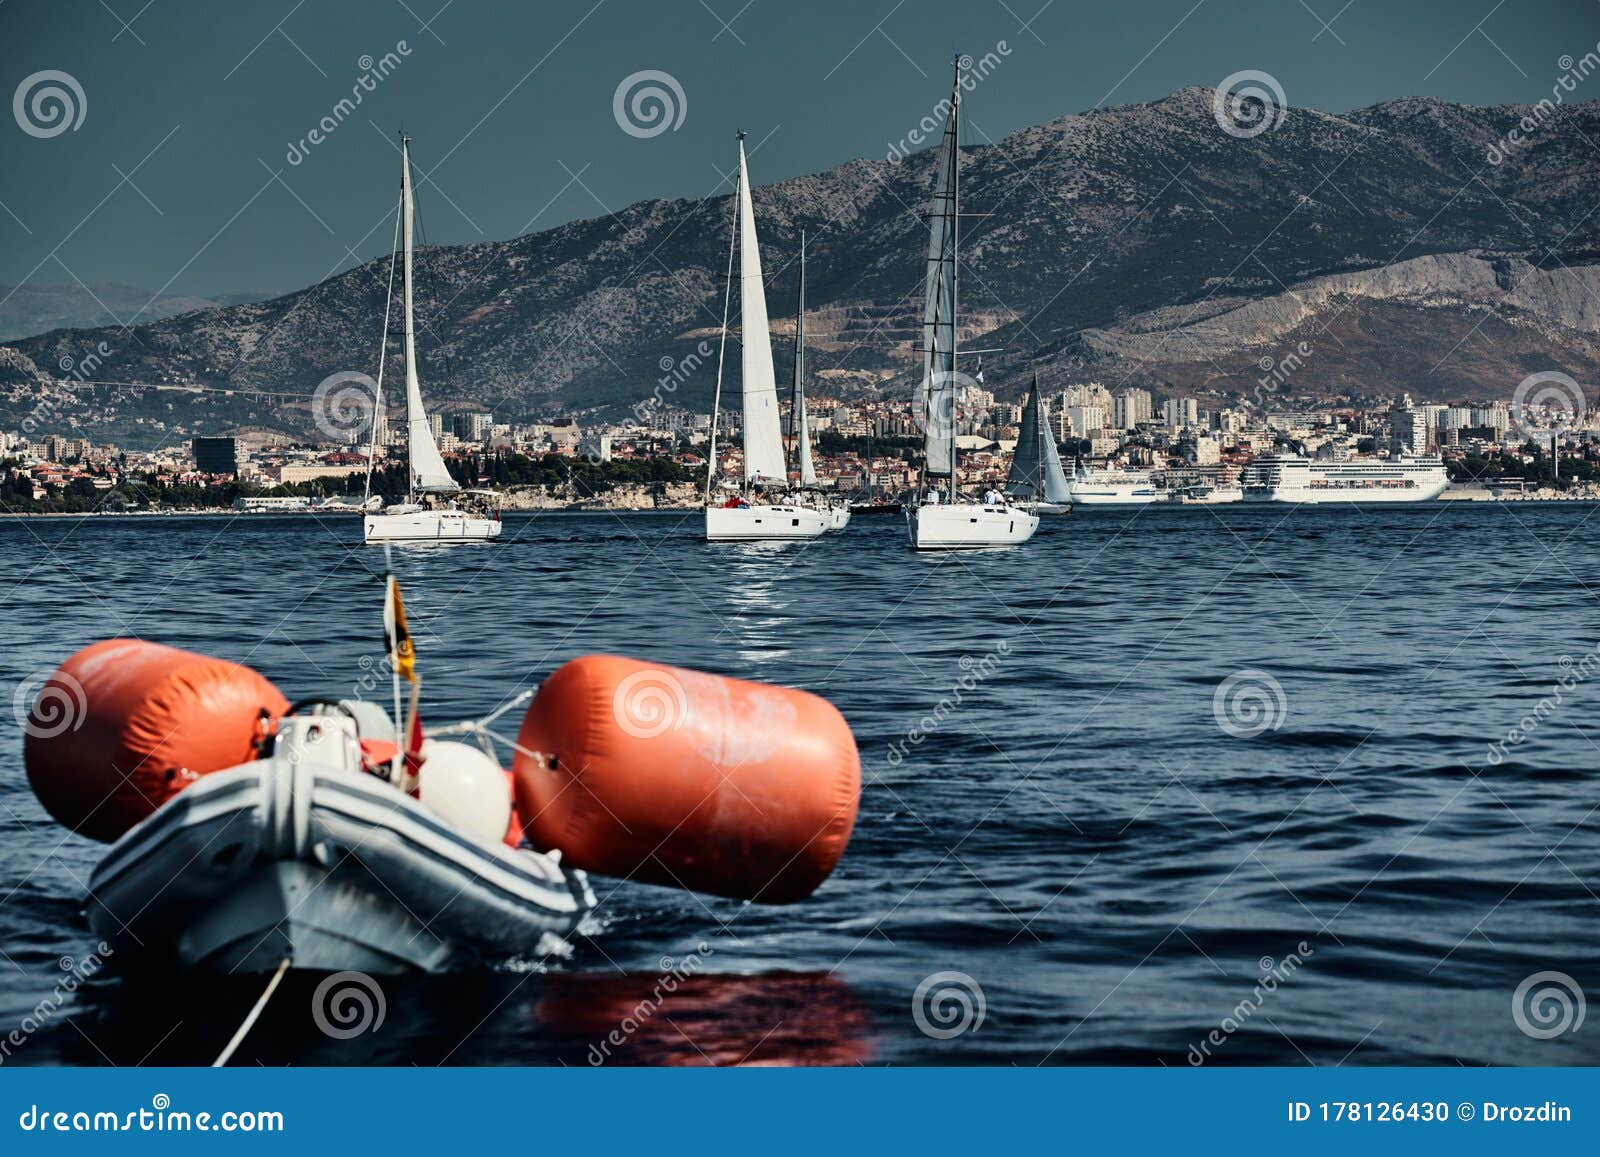 The Rubber Boat of Organizers of a Regatta with the Judge and Balloon of  Orange Color, the Race of Sailboats, Intense Stock Photo - Image of race,  sailboat: 178126430